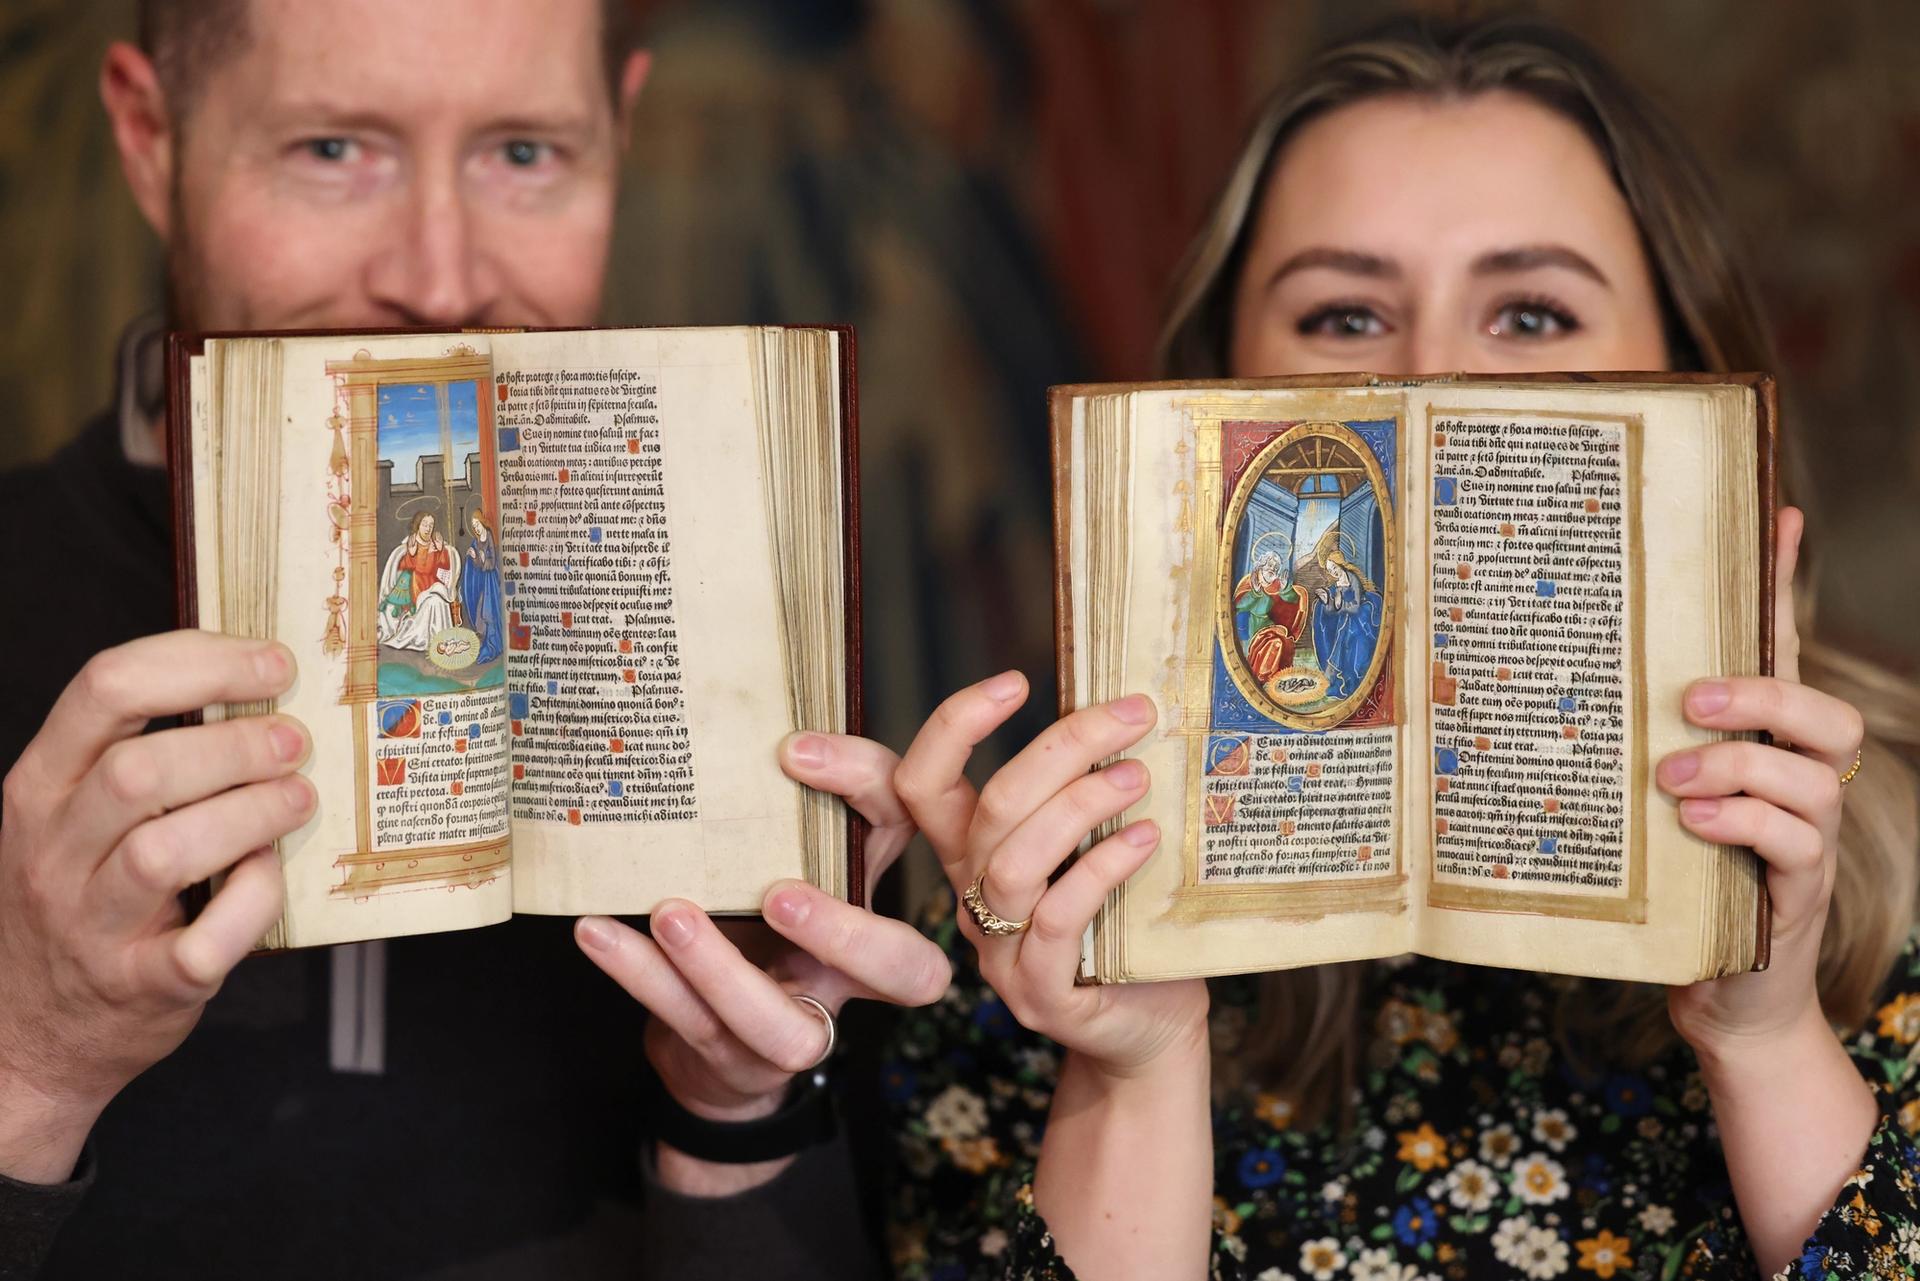 Catherine of Aragon and Anne Boleyn's Book of Hours

Courtesy of Hever Castle